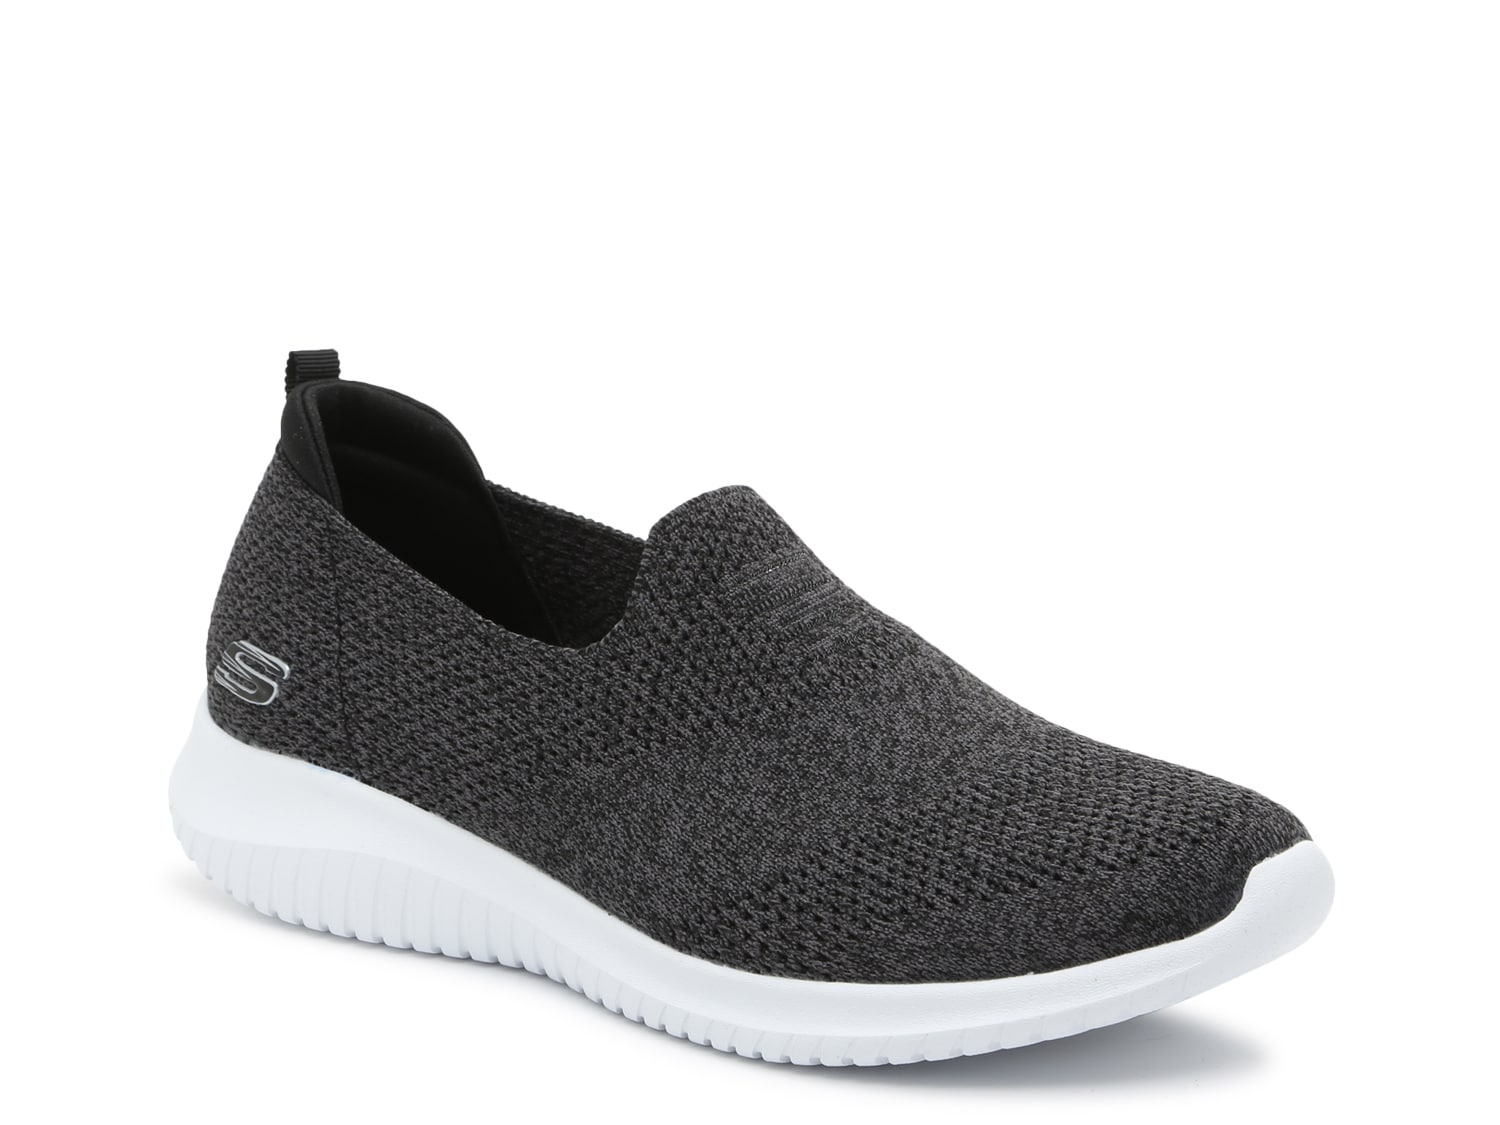 skechers sneakers no laces